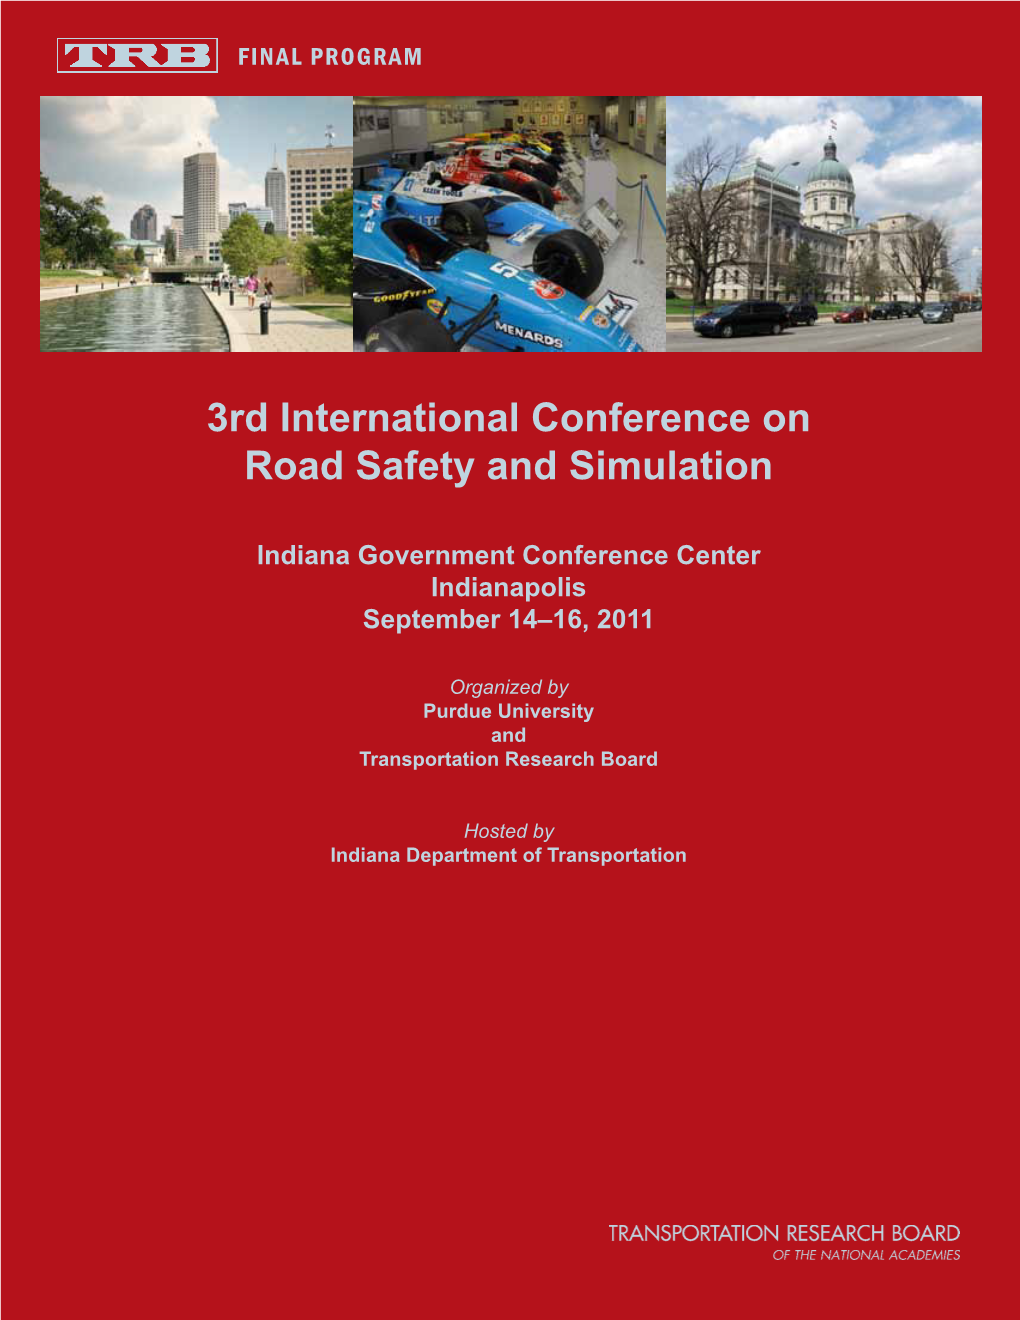 3Rd International Conference on Road Safety and Simulation